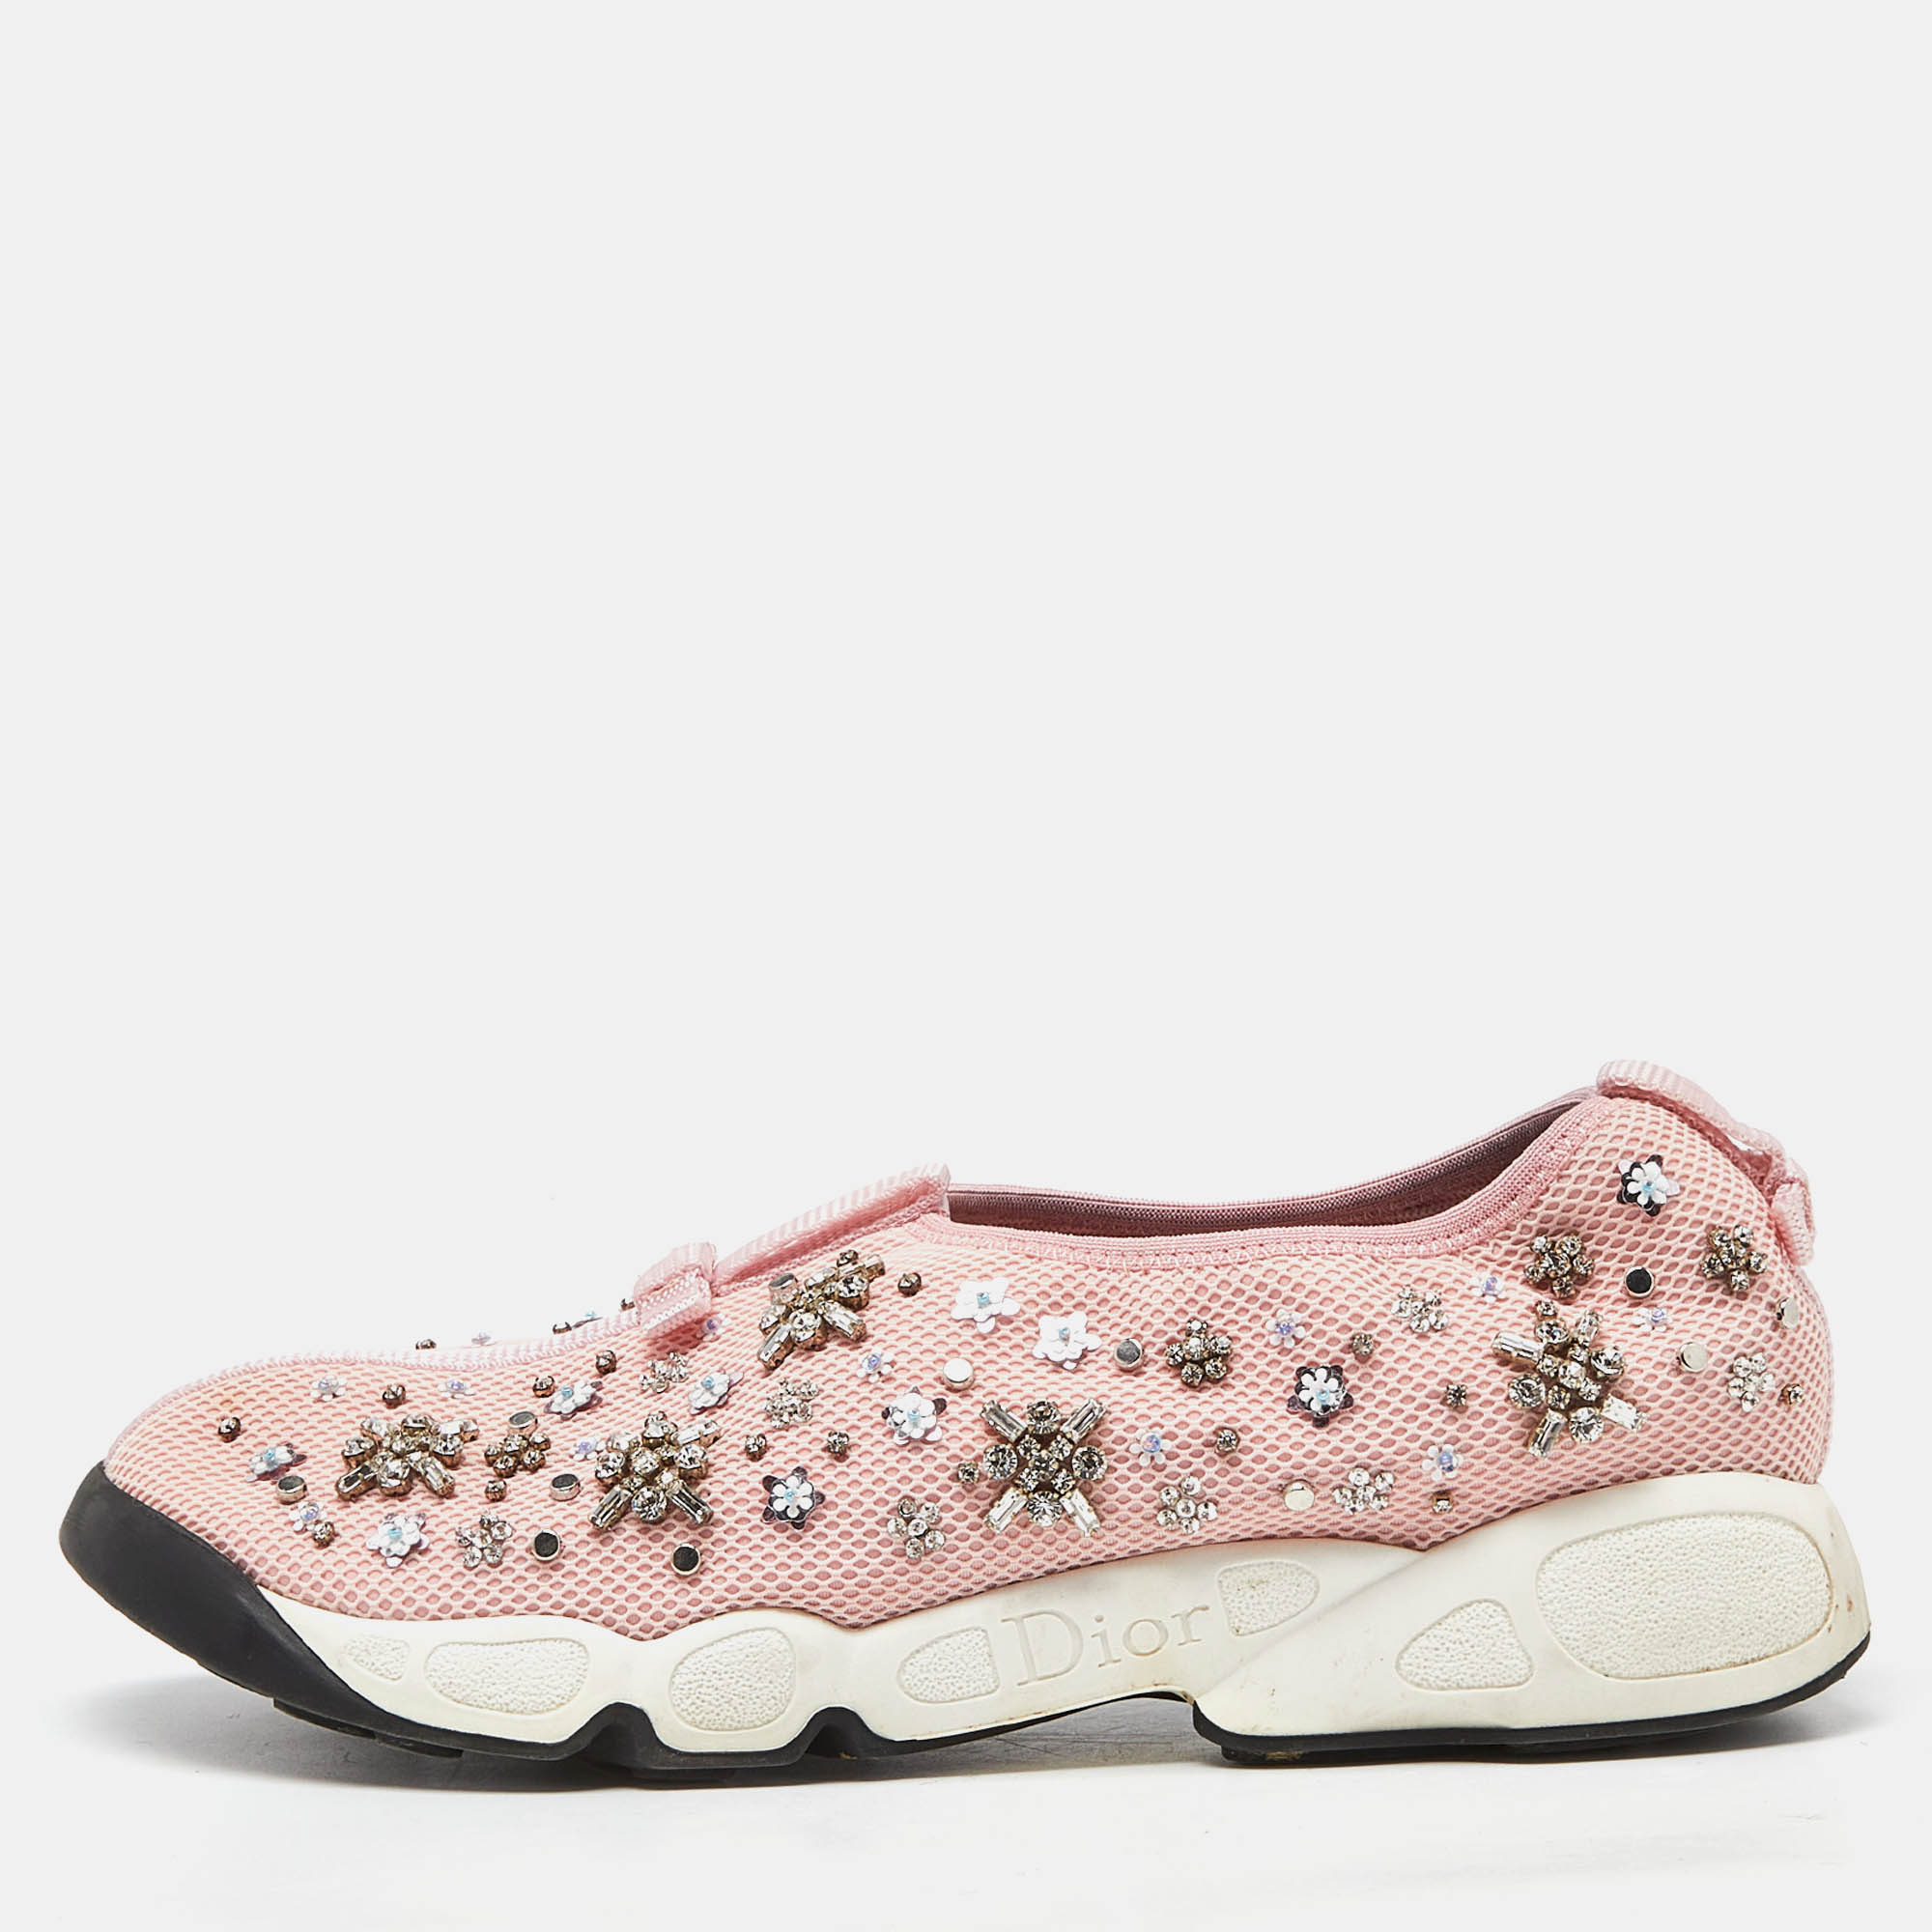 Dior pink embellished mesh fusion sneakers size 40